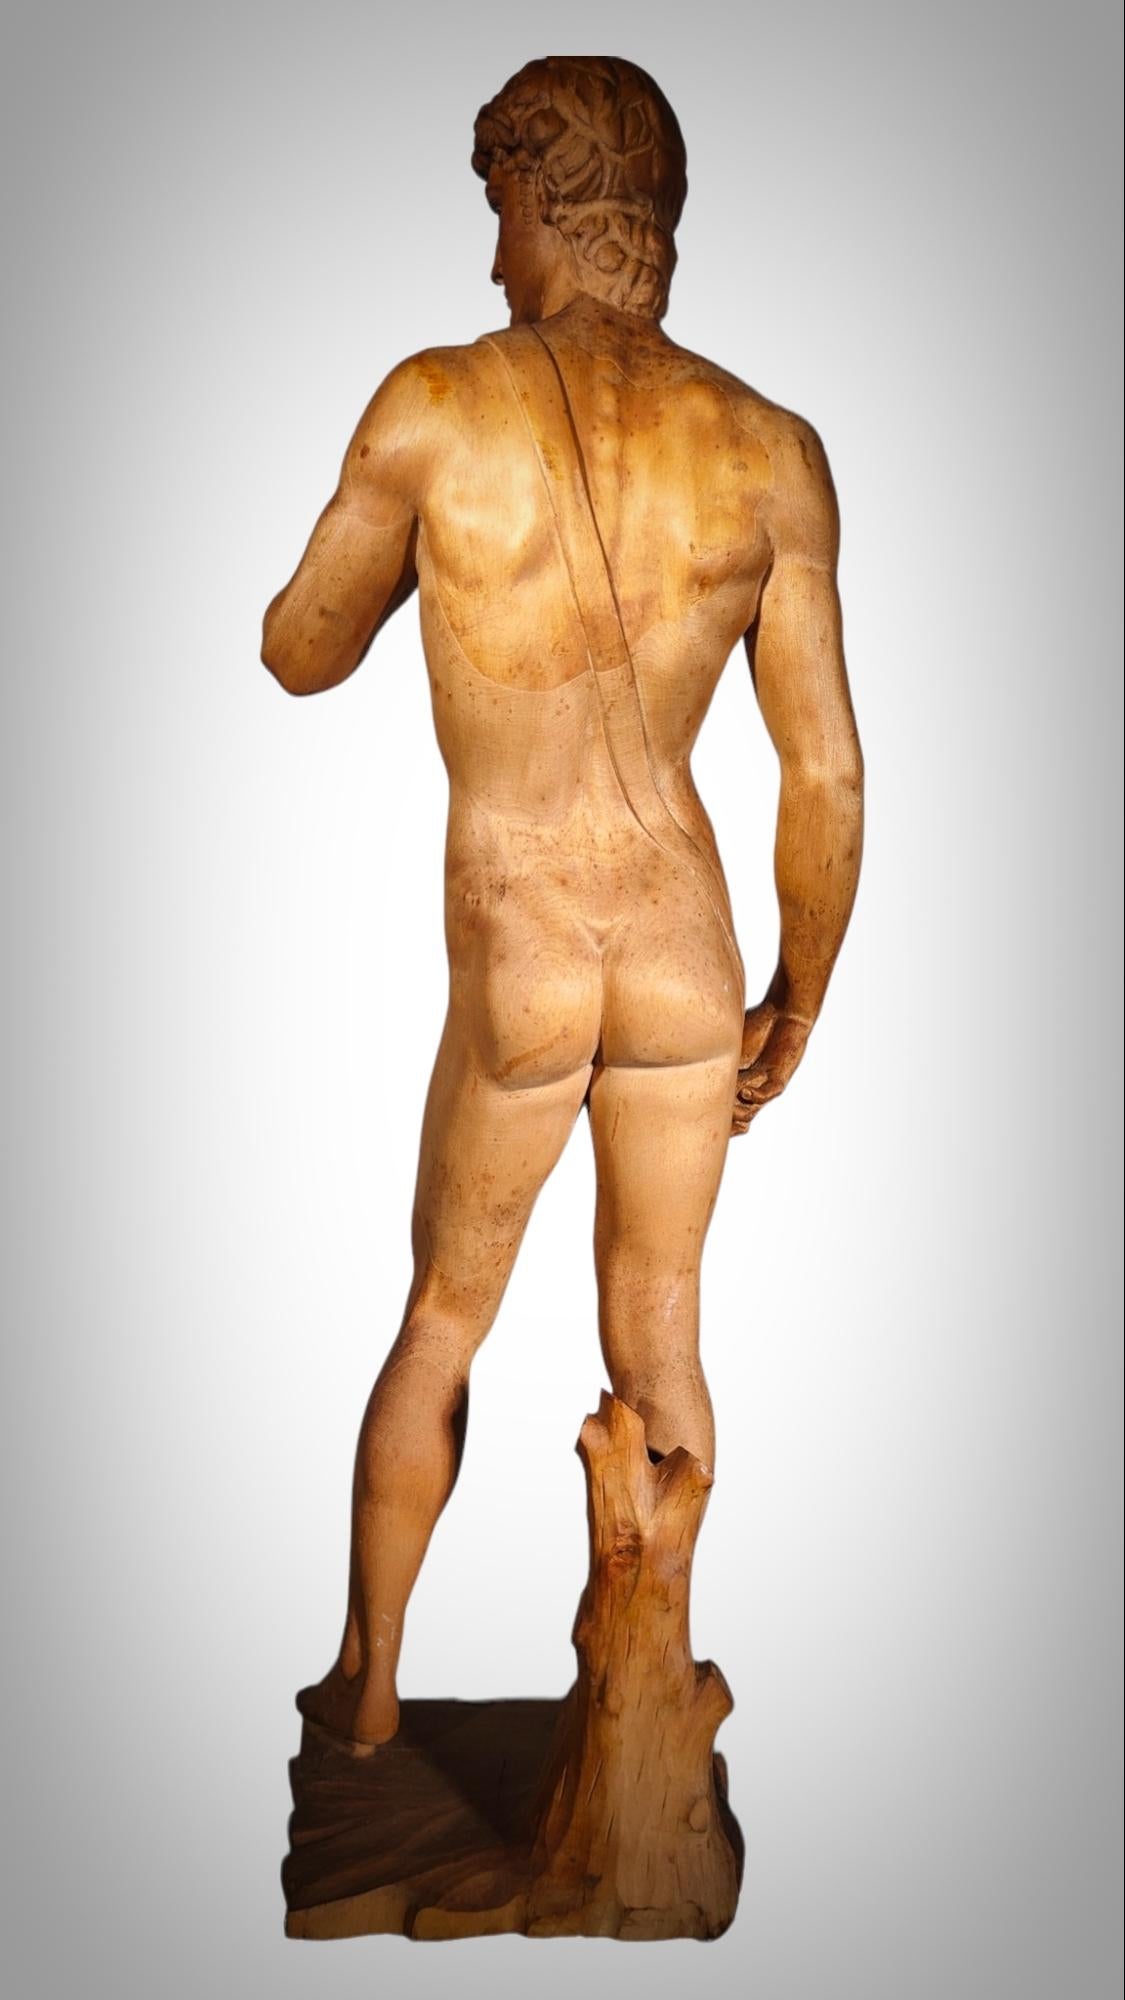 DAVID SCULPTURE IN WOOd For Sale 8